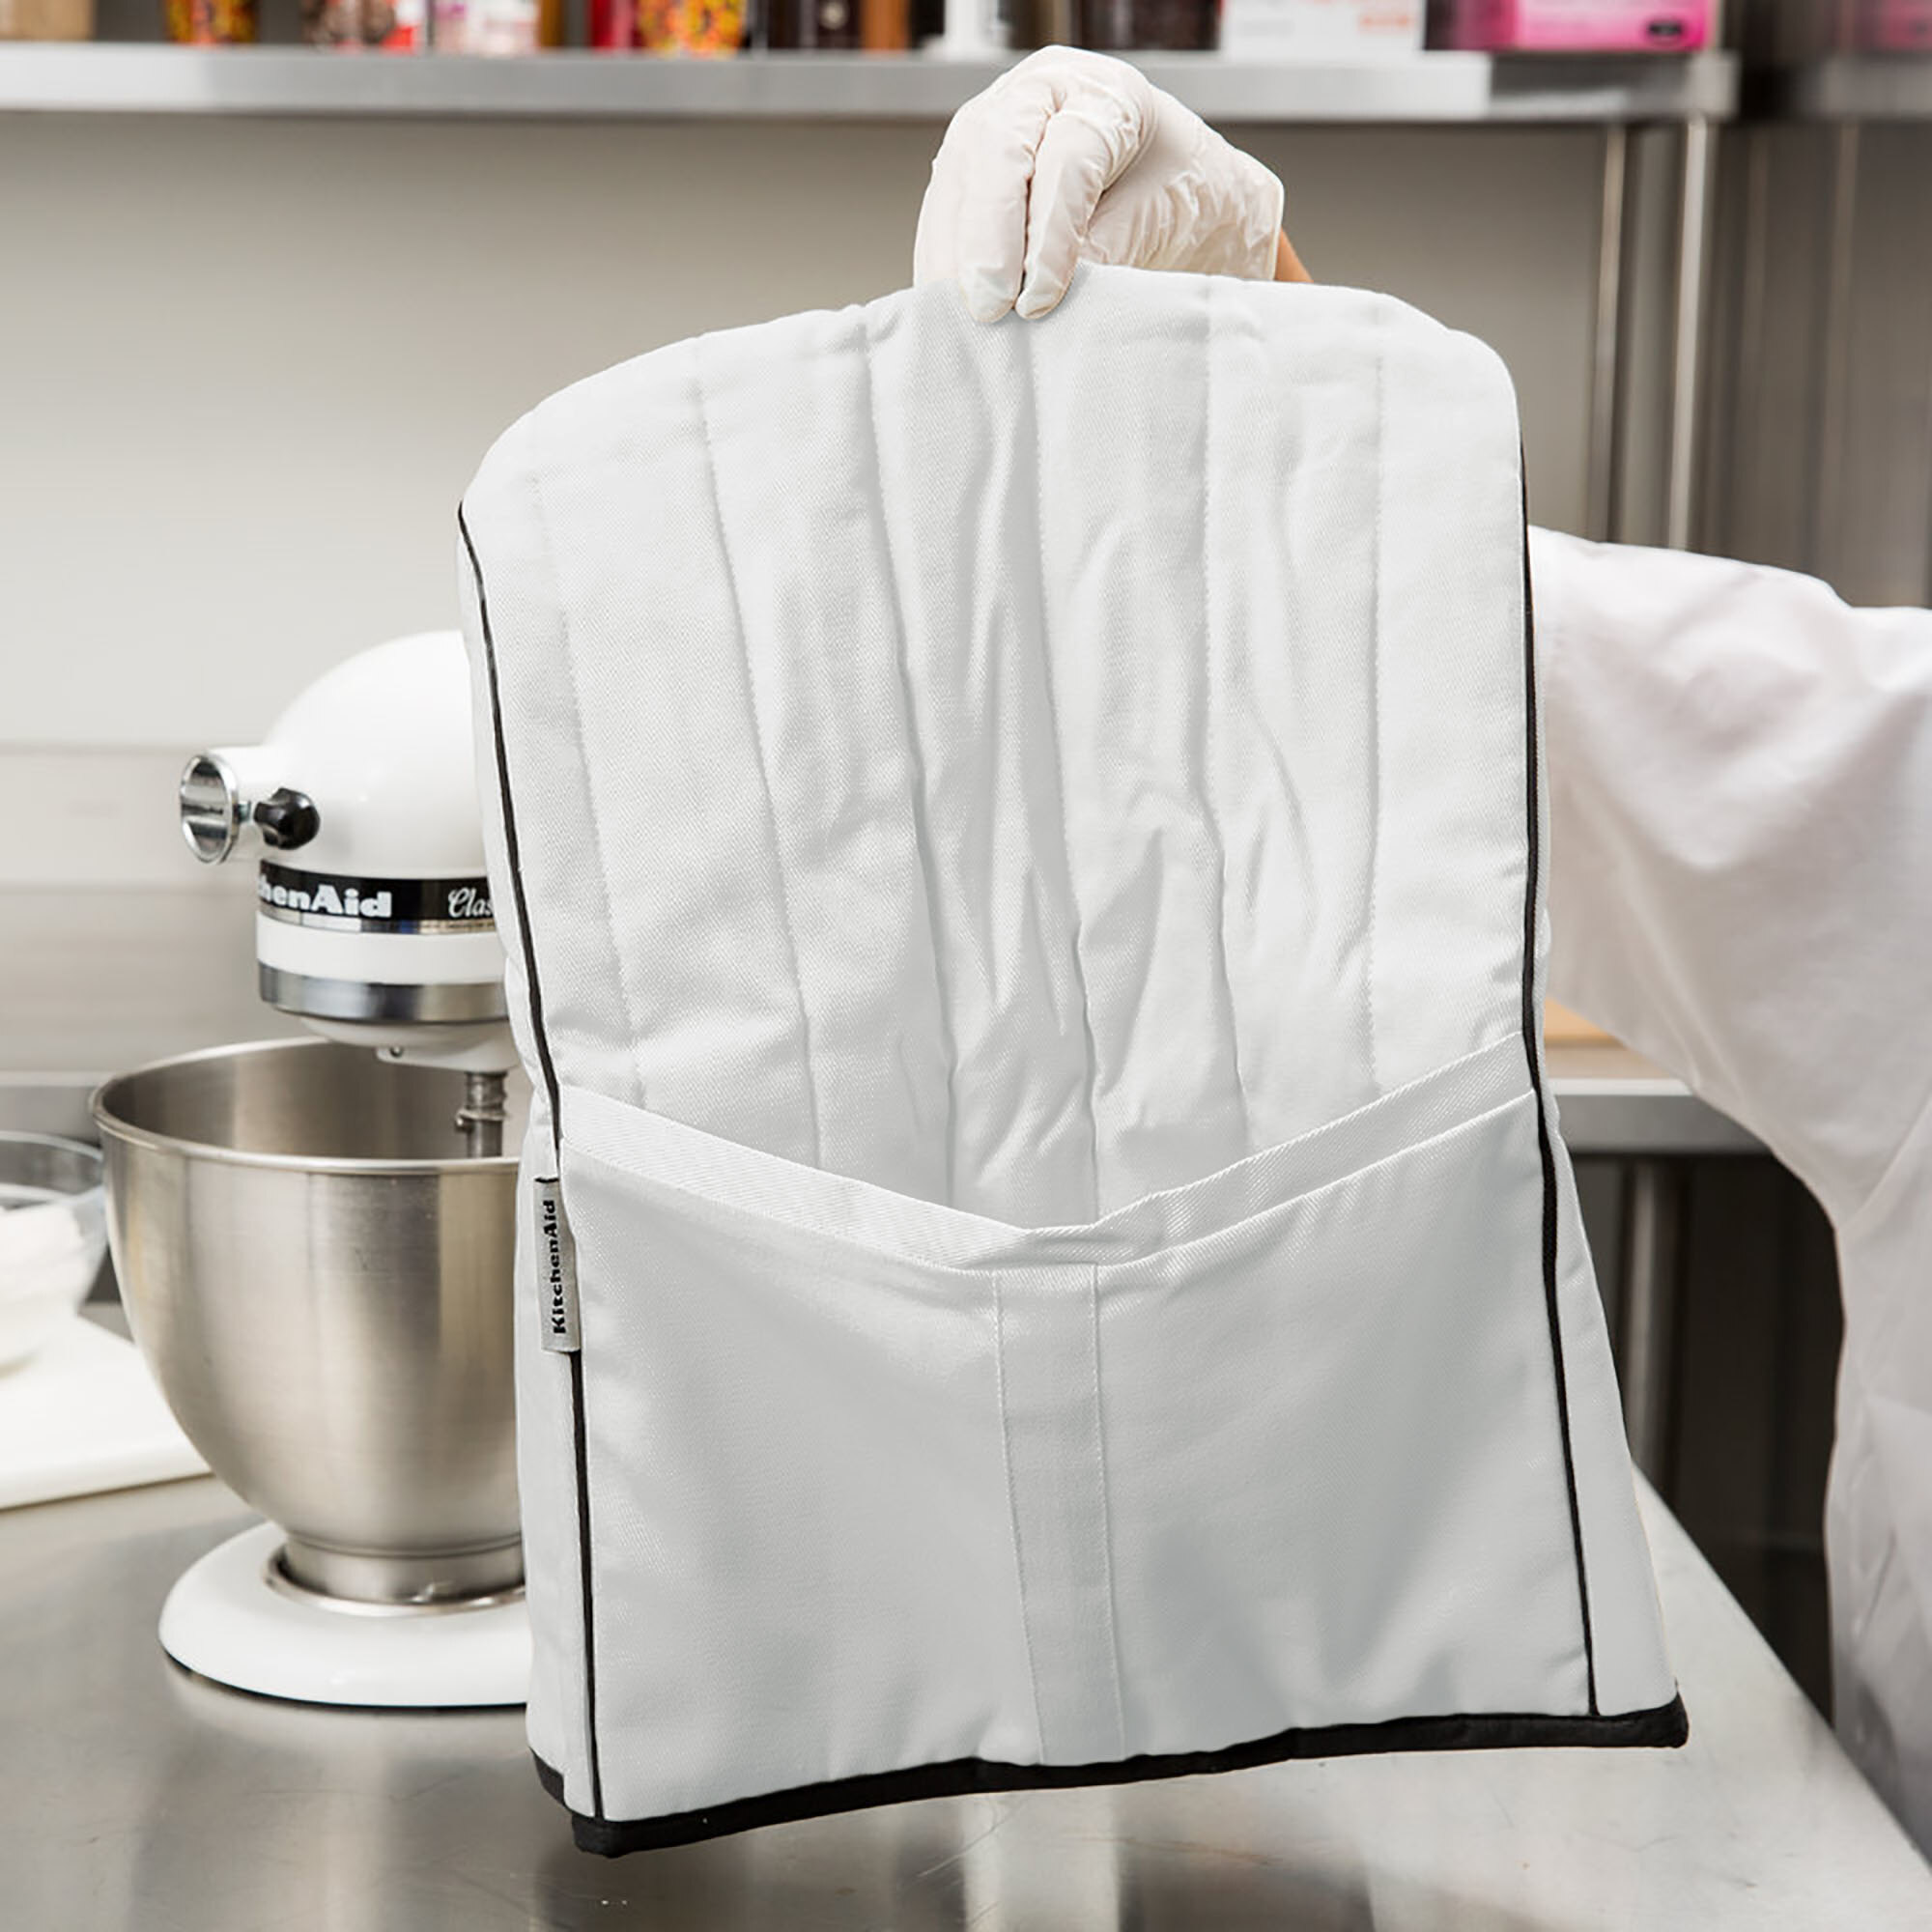 KitchenAid KMCC1WH White Quilted Cover for KitchenAid Stand Mixers